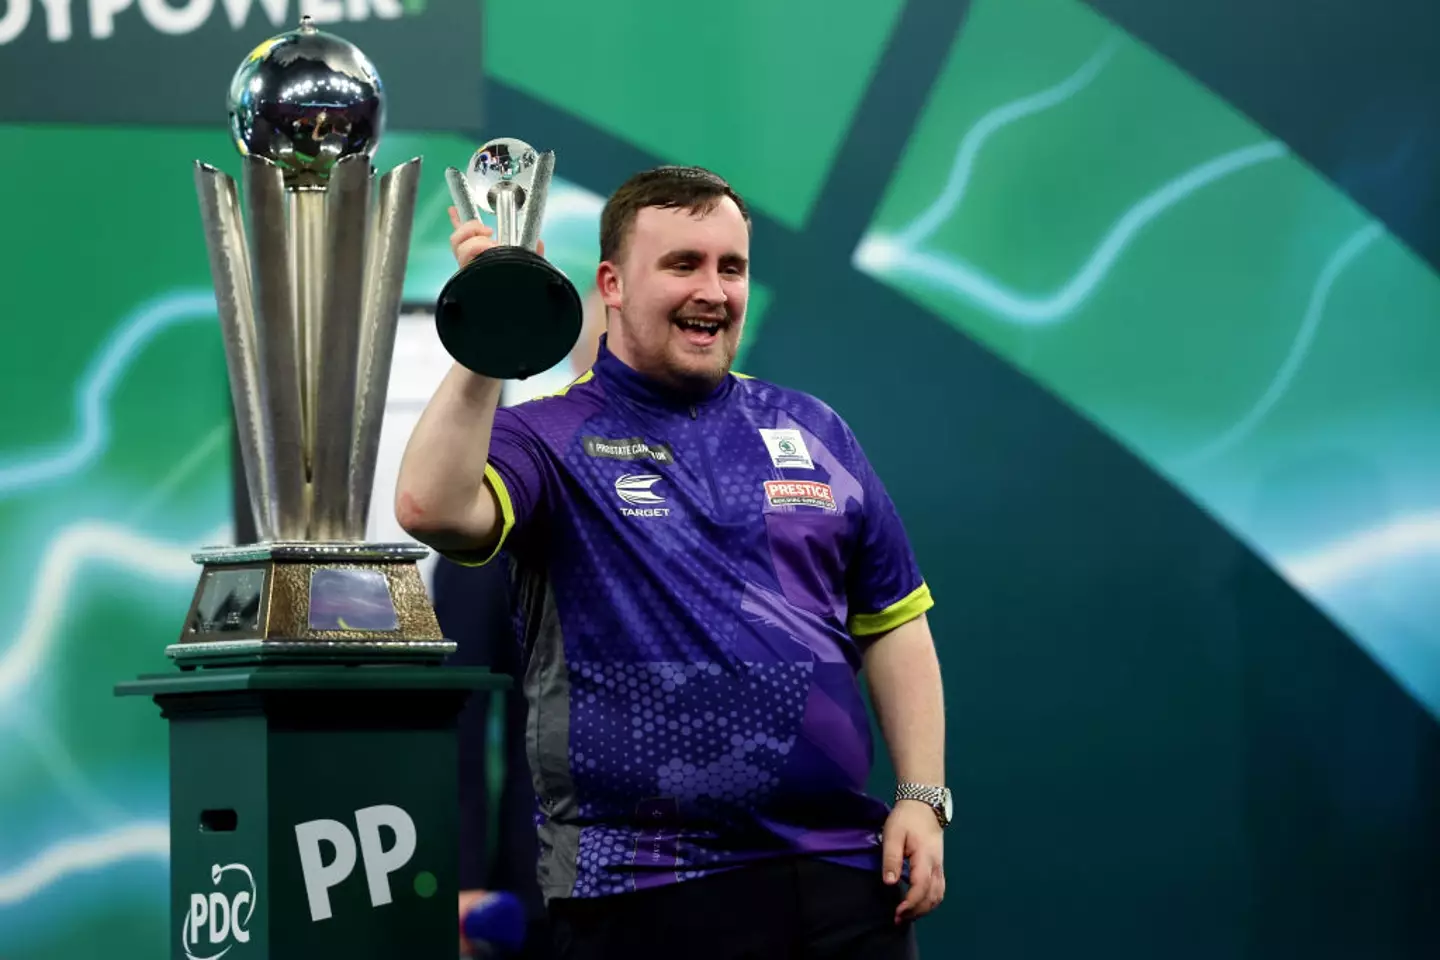 Littler shot to fame after finishing runner-up at the World Darts Championship (Image: Getty)